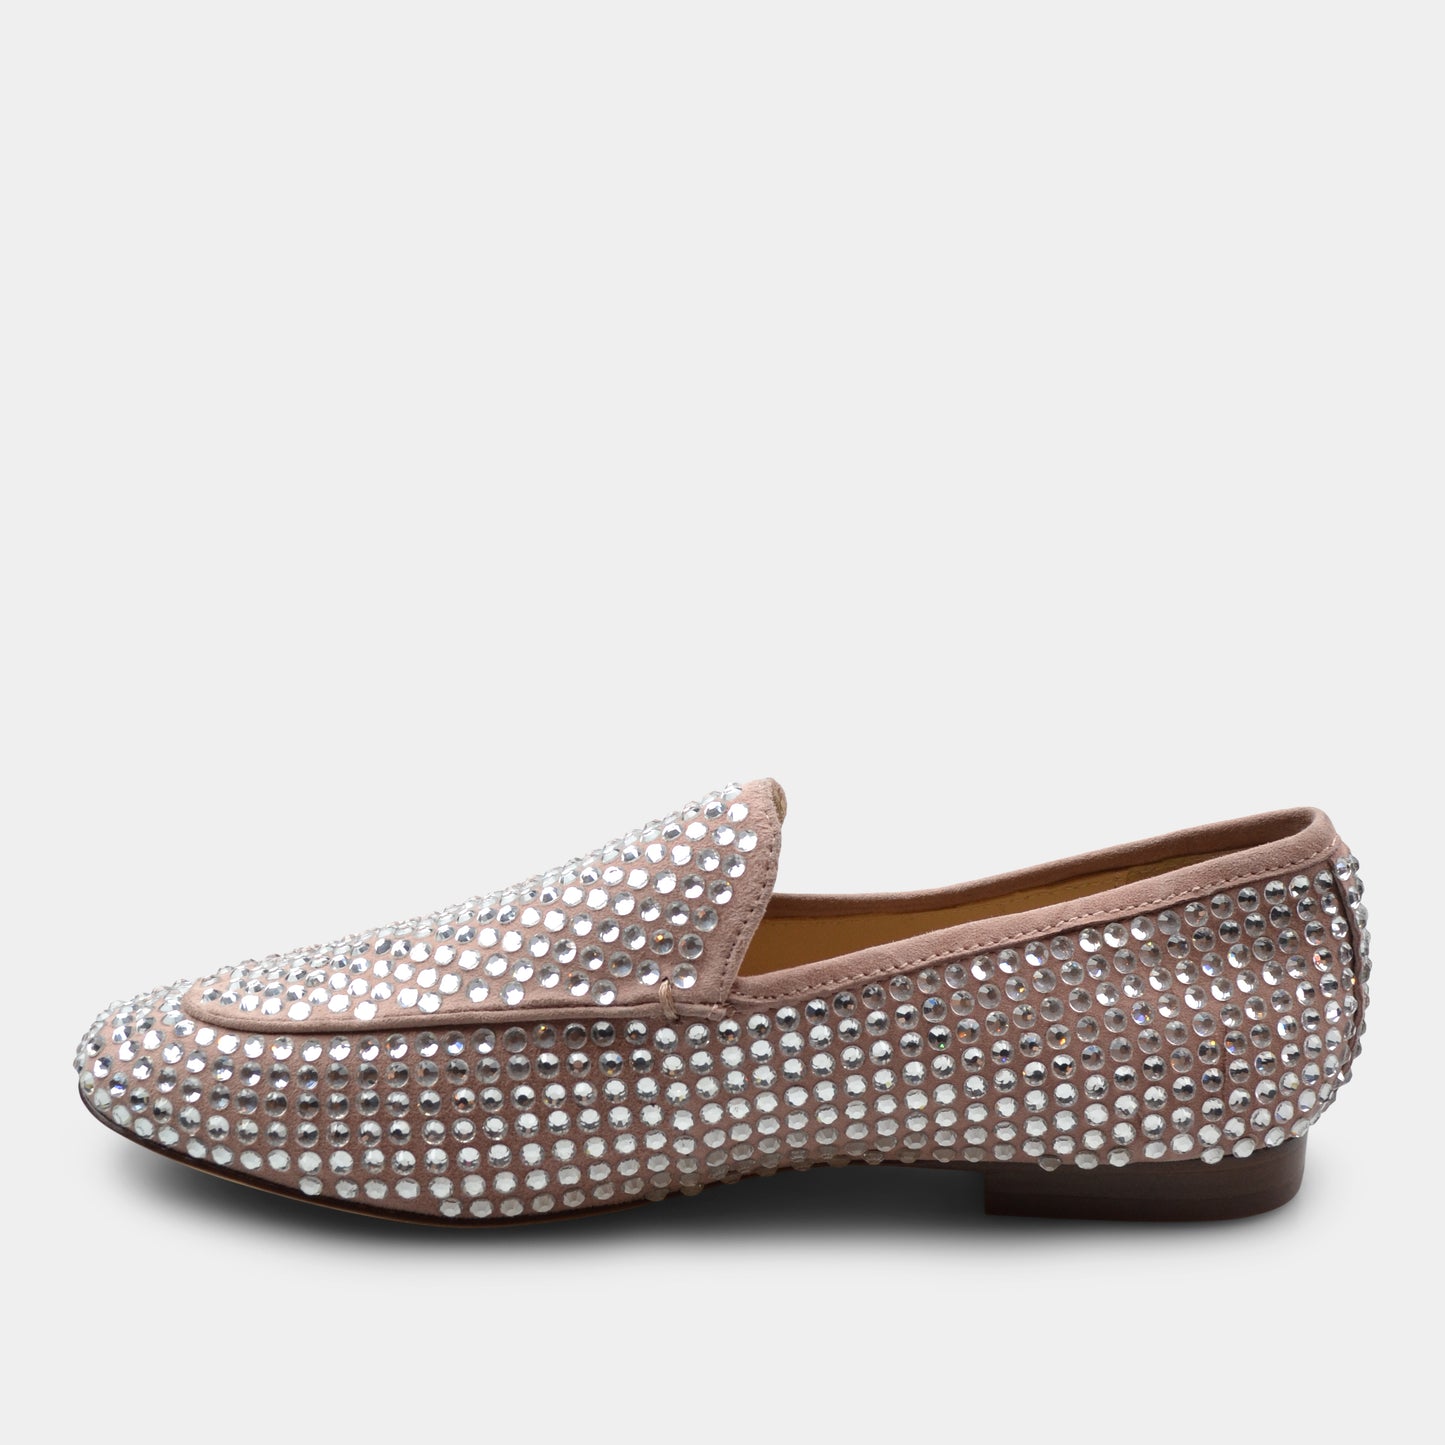 LOLA CRUZ LOAFERS IN PINK